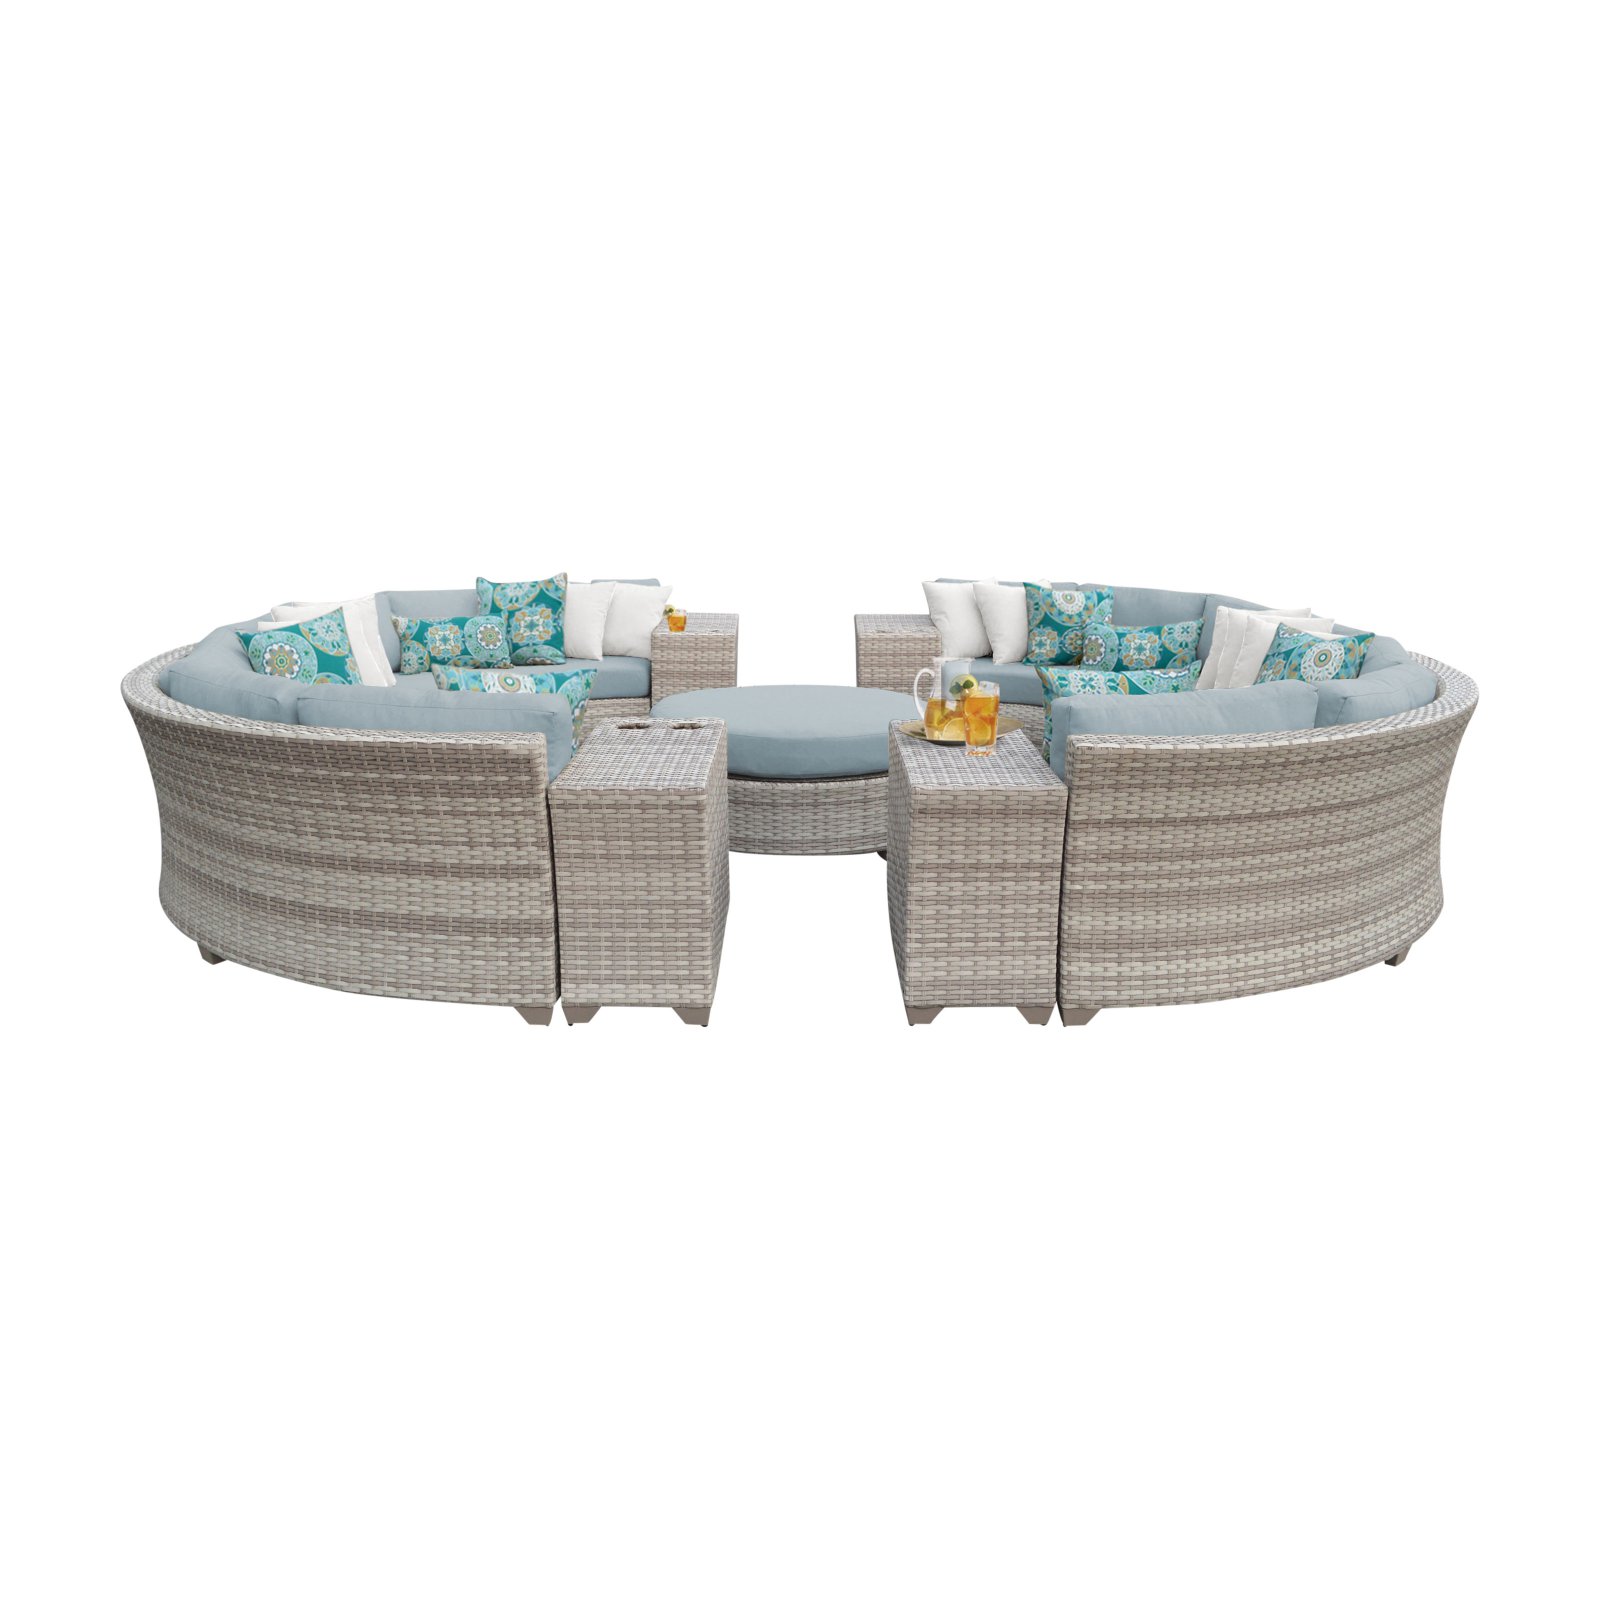 TK Classics Fairmont All-Weather Wicker 11 Piece Round Sectional Patio Conversation Set - image 2 of 2